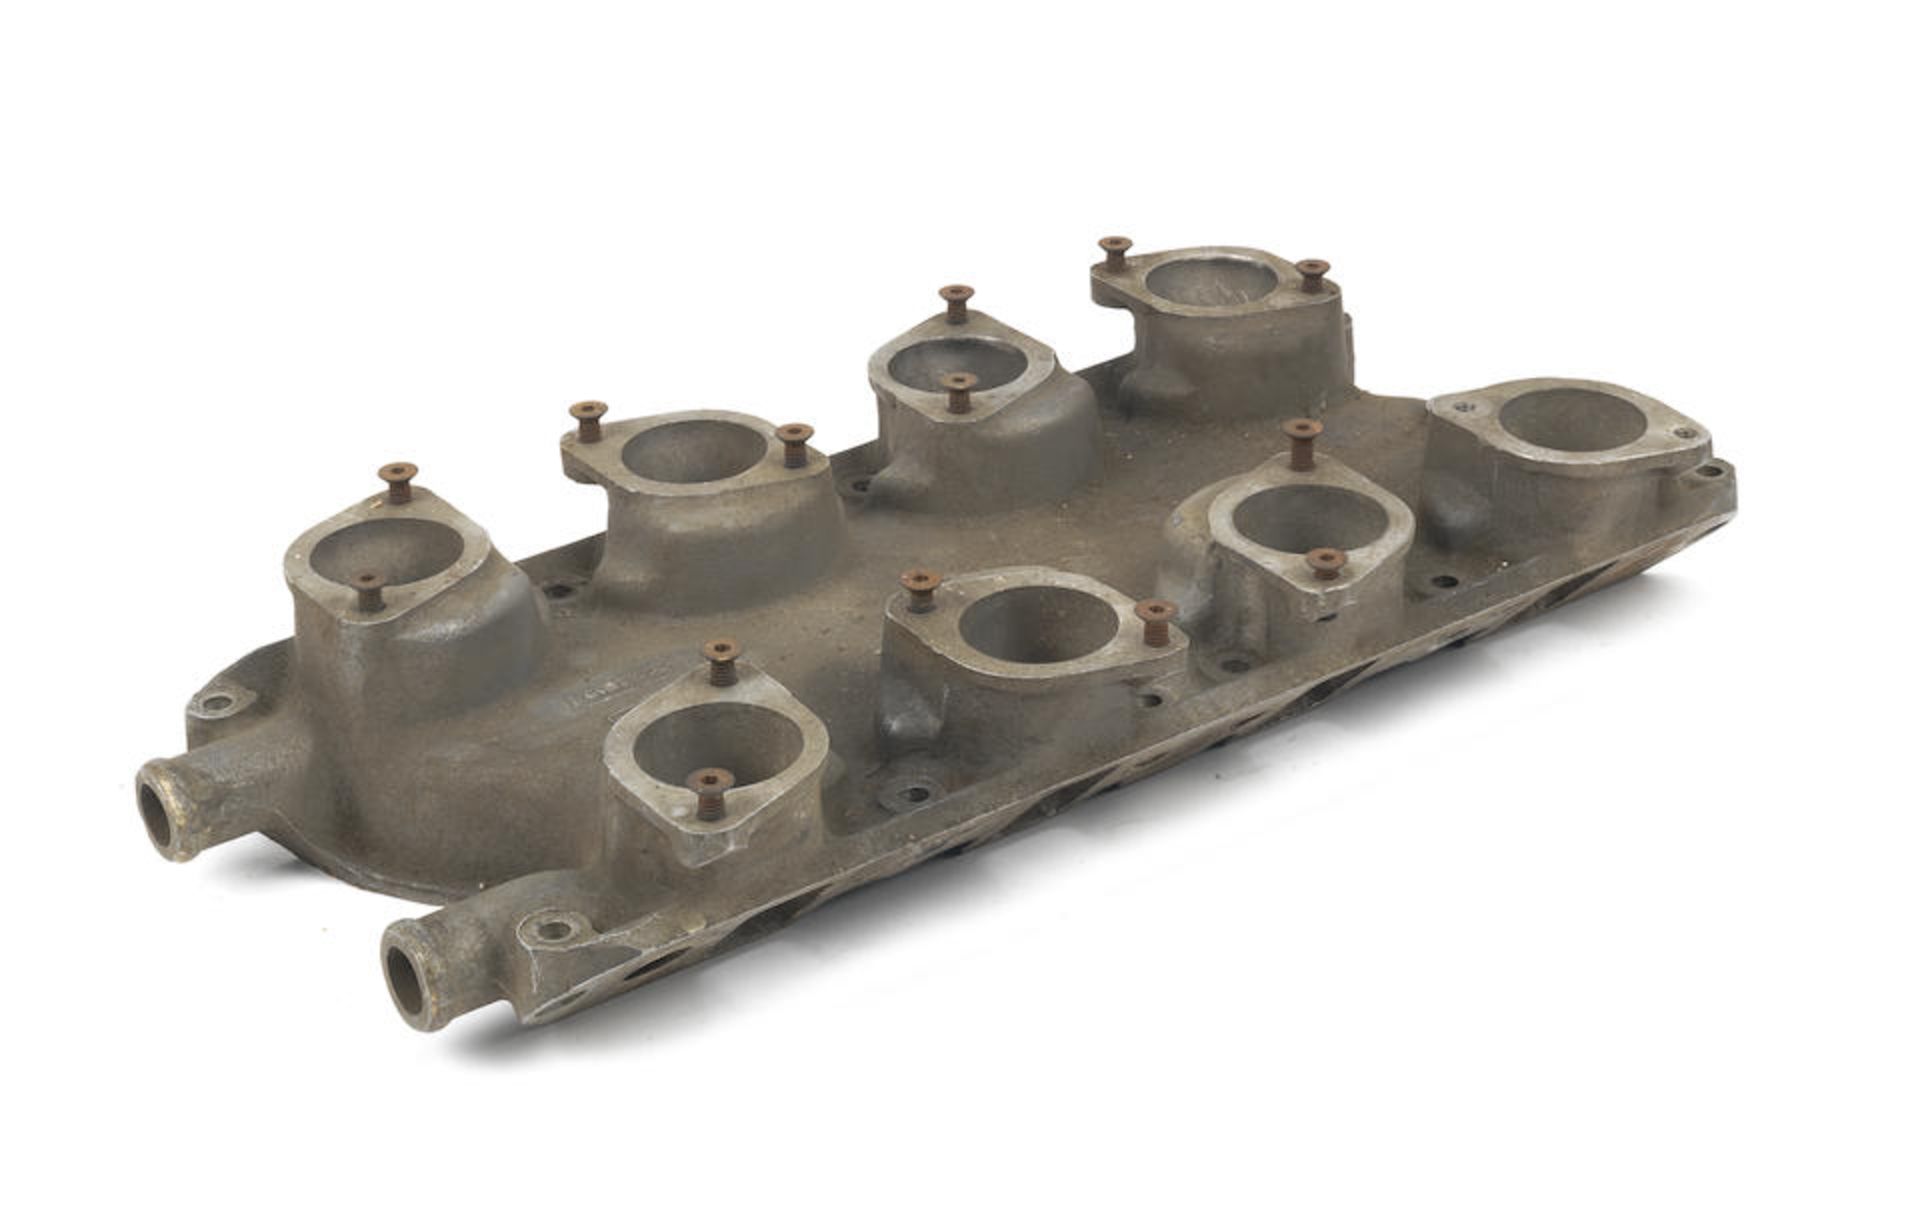 An engine intake manifold for Weber carburettors by Fomoco, believed for Ford V8 engines